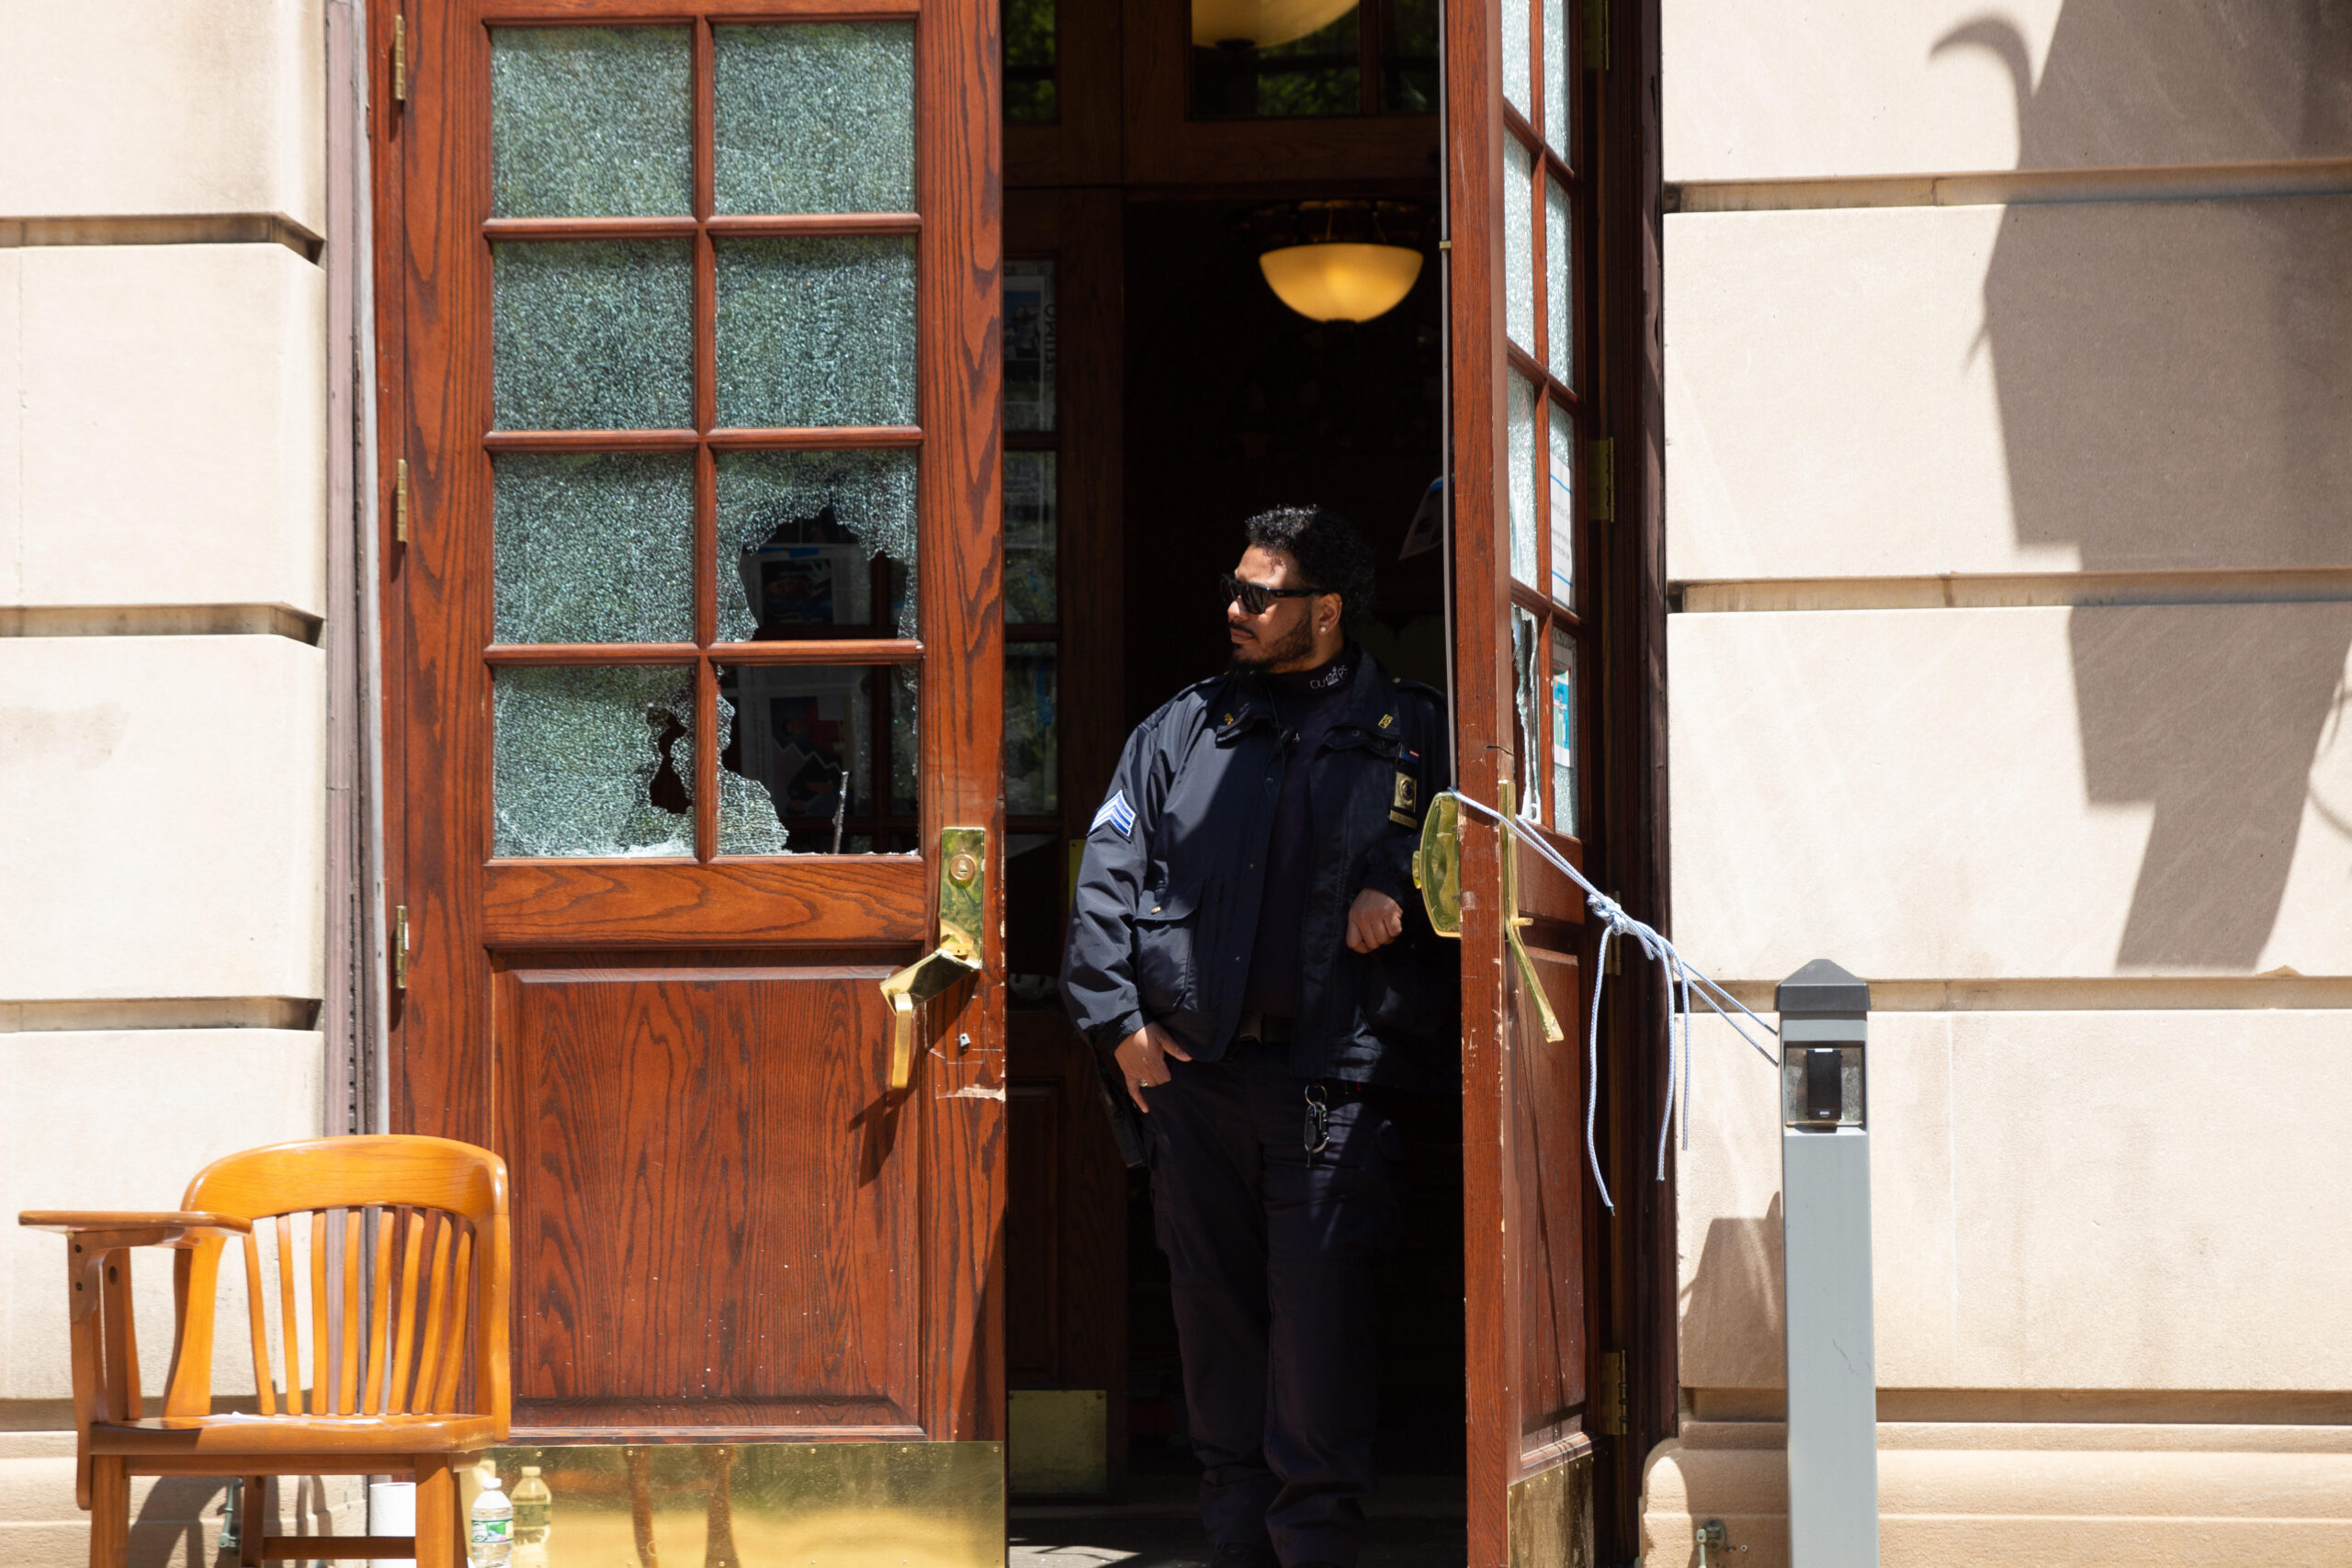 Image taken on May 1, 2024 a day after police raided the protests at Columbia University a public safety officer stands in the doorway of Hamilton Hall. (Credit: Indy Scholtens)